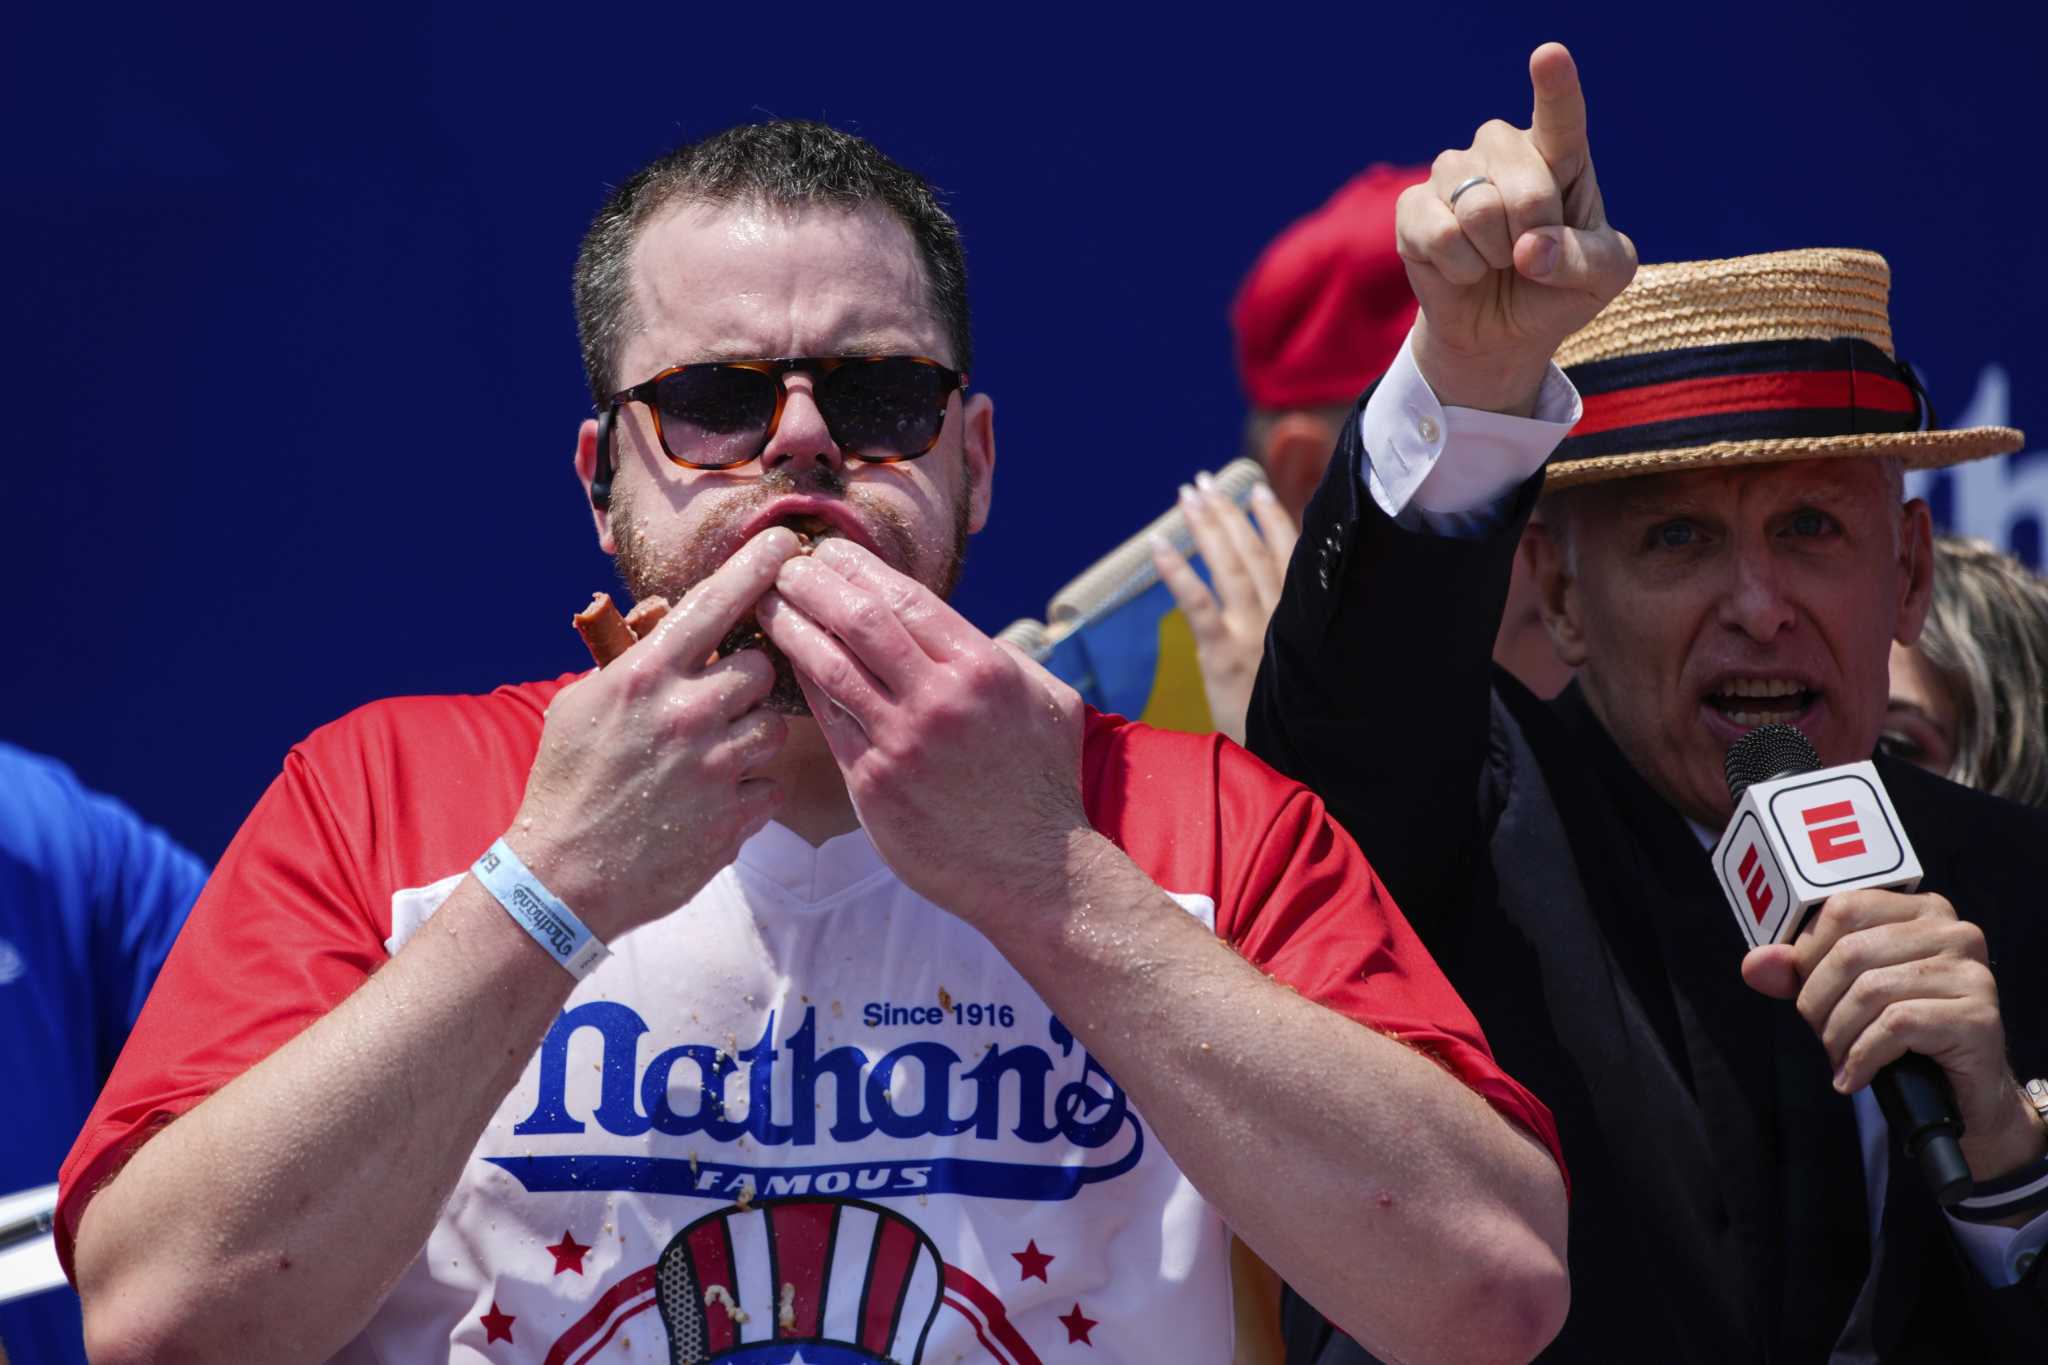 Nathan's Famous hot dog eating contest goes on without its biggest star